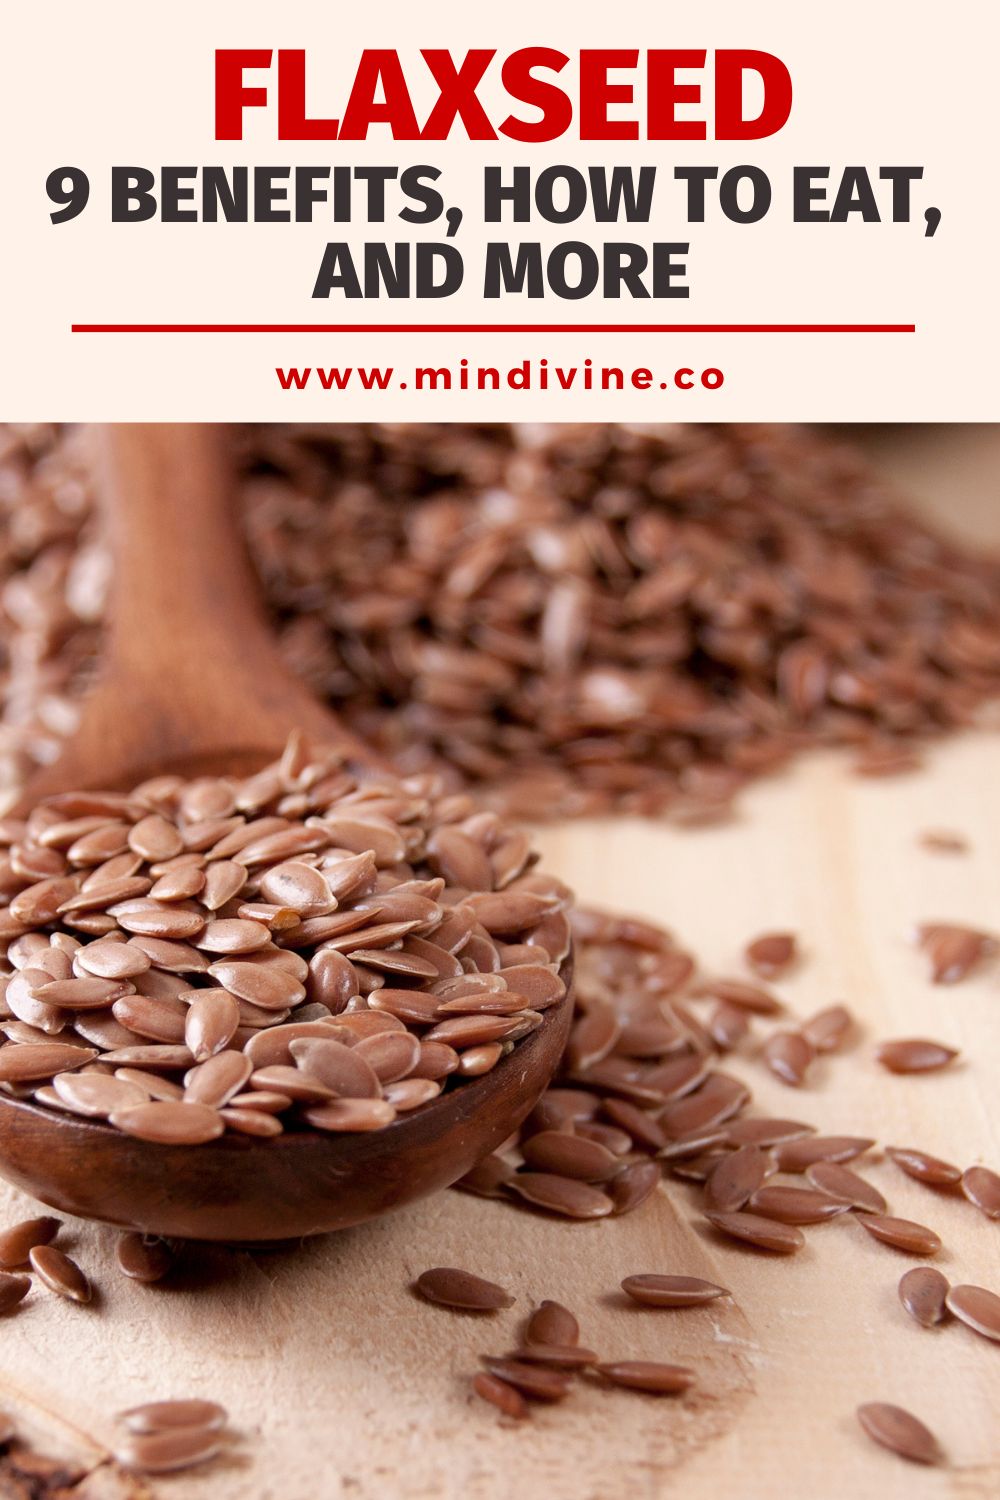 Find out everything you need to know about flaxseed.